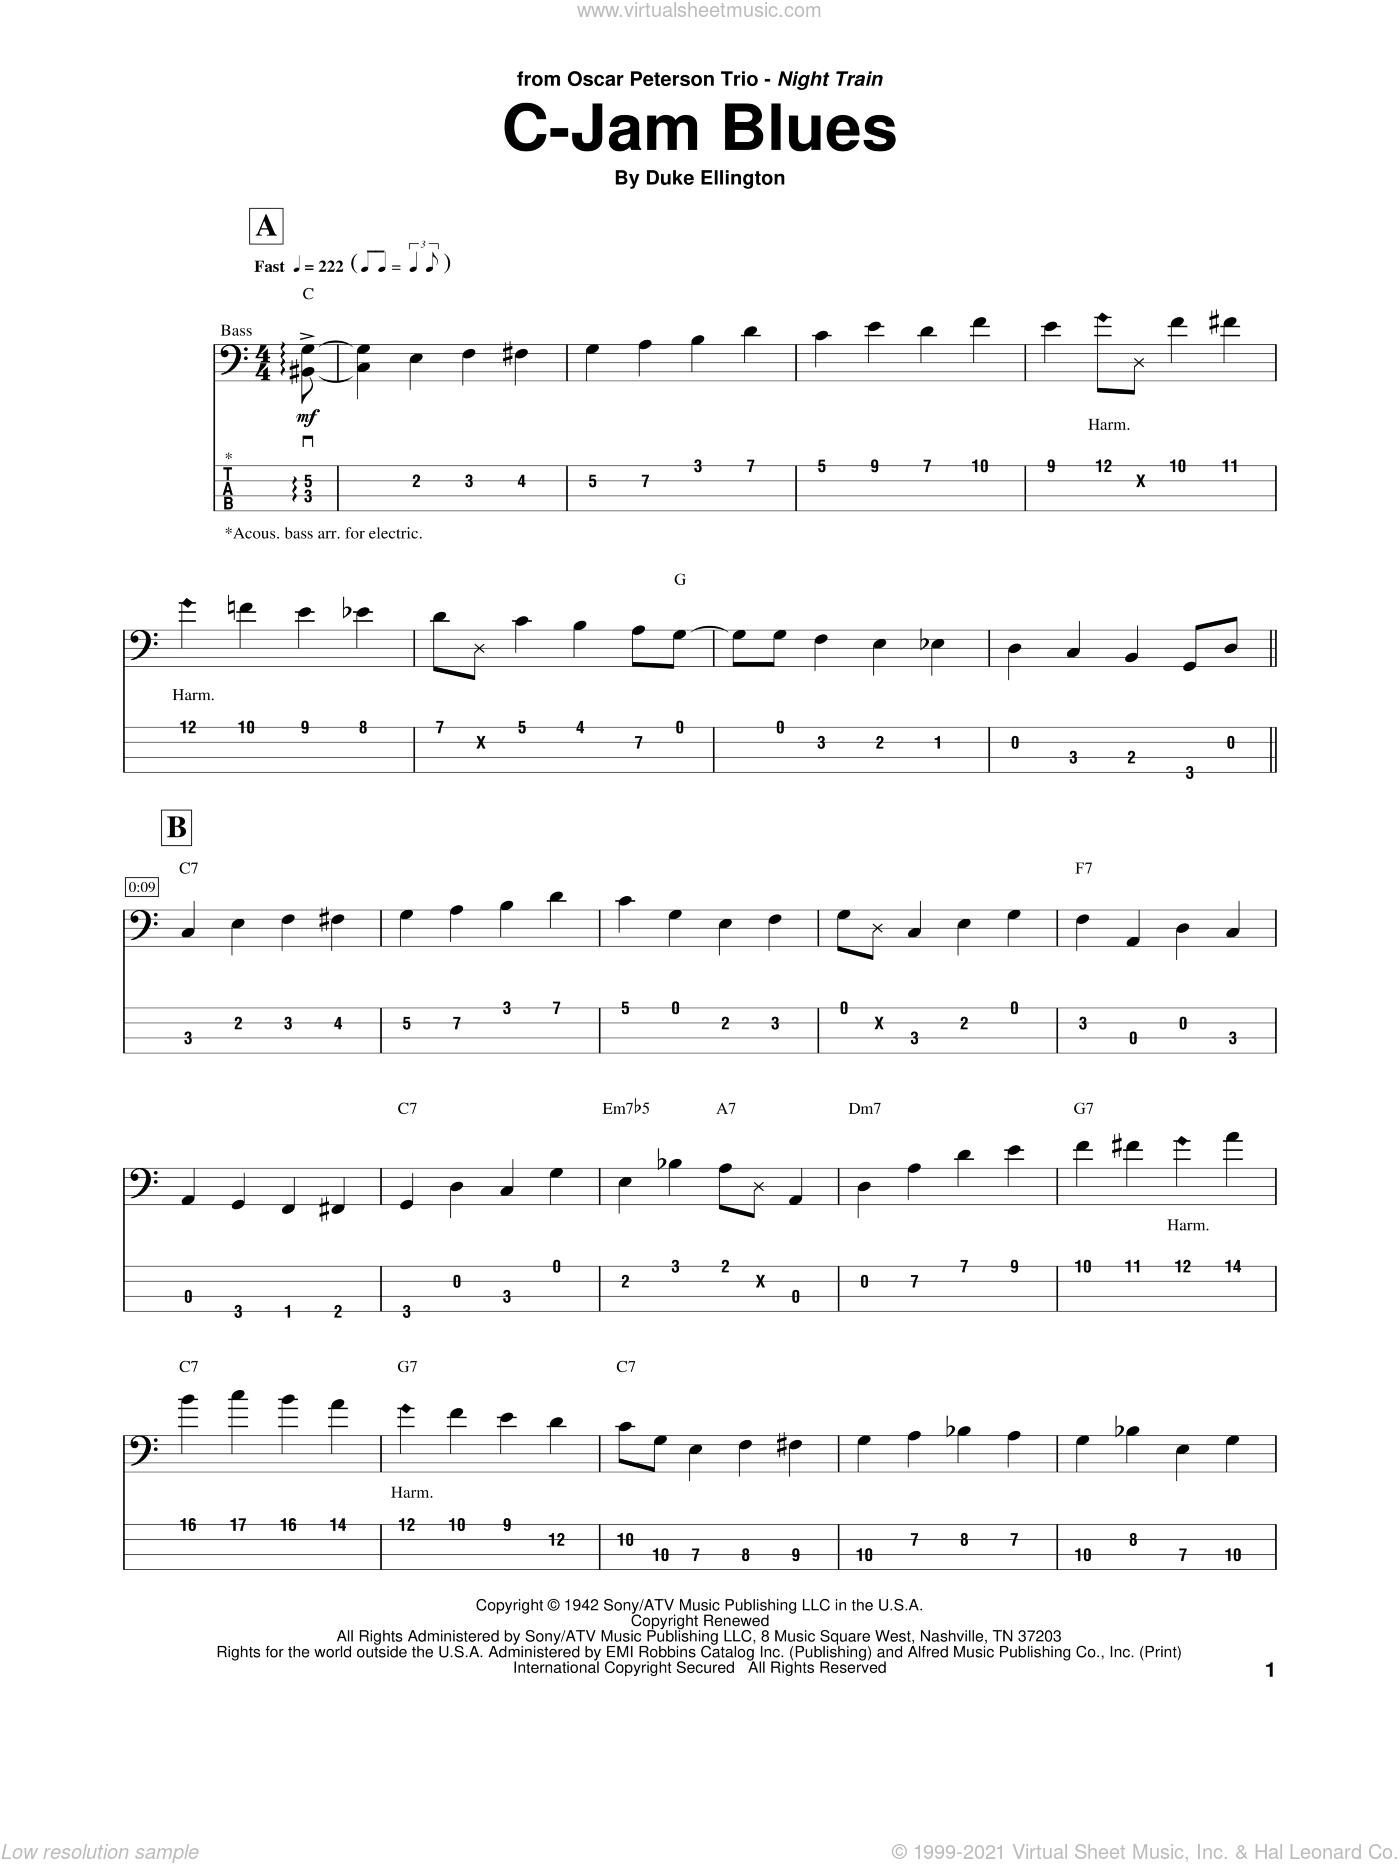 blues tablature with thumb chords